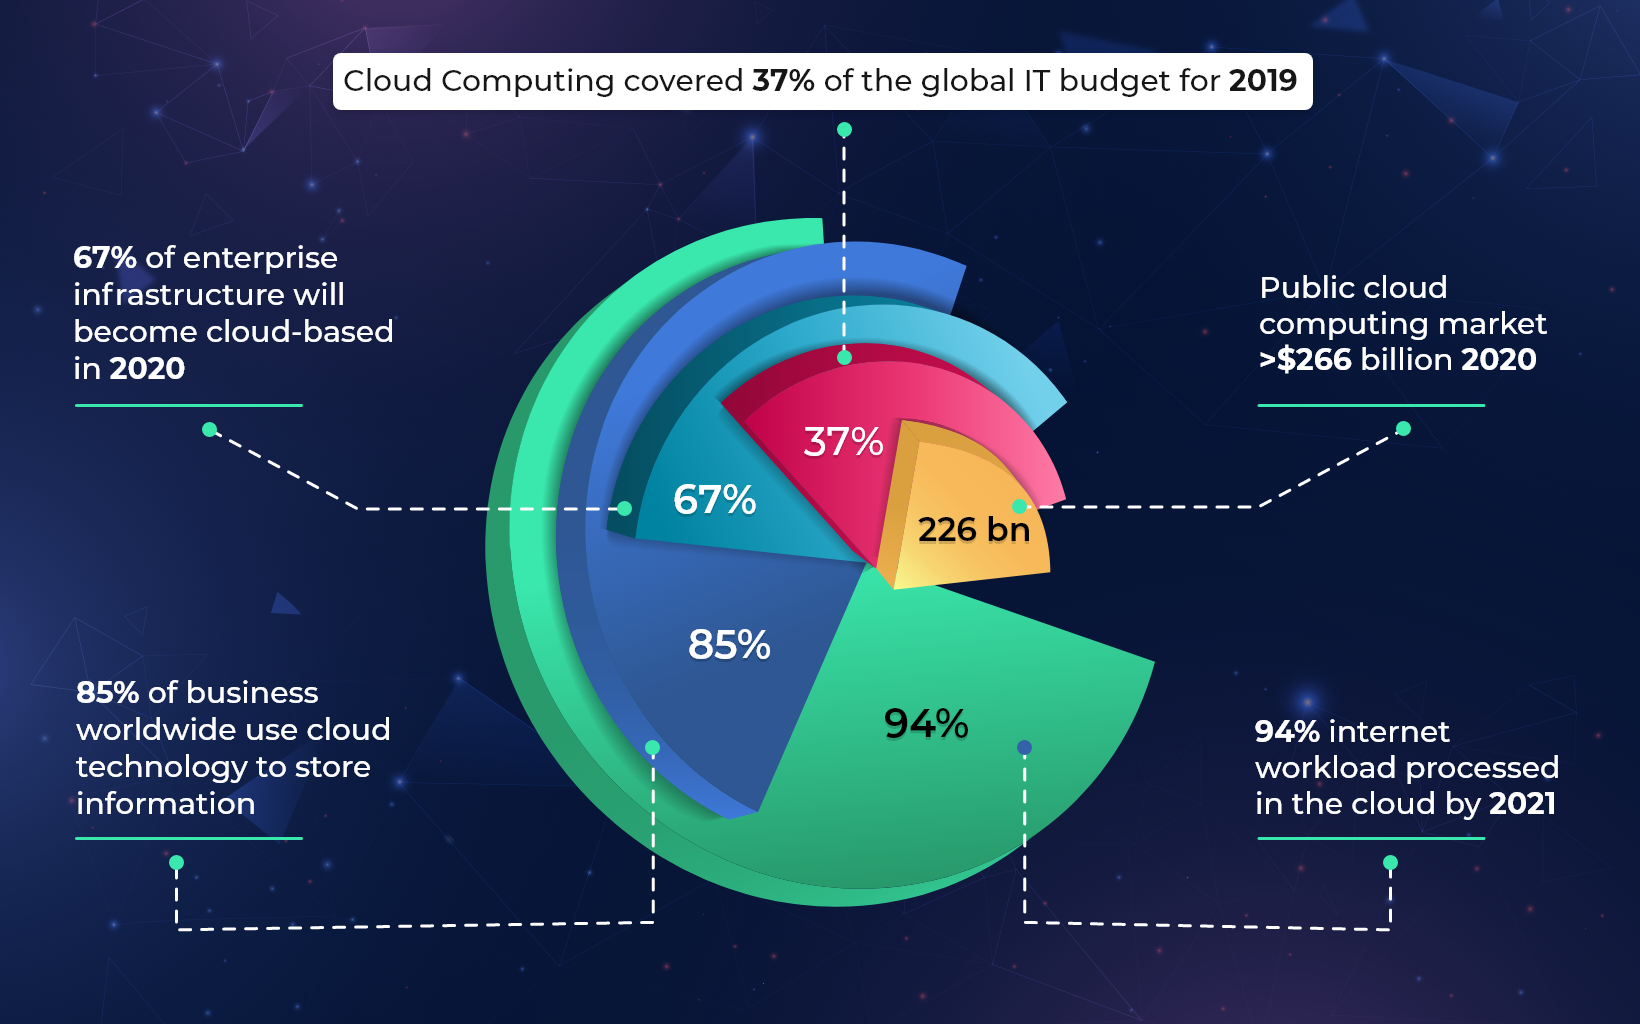 Cloud Computing covered 37% of the global IT budget for 2019